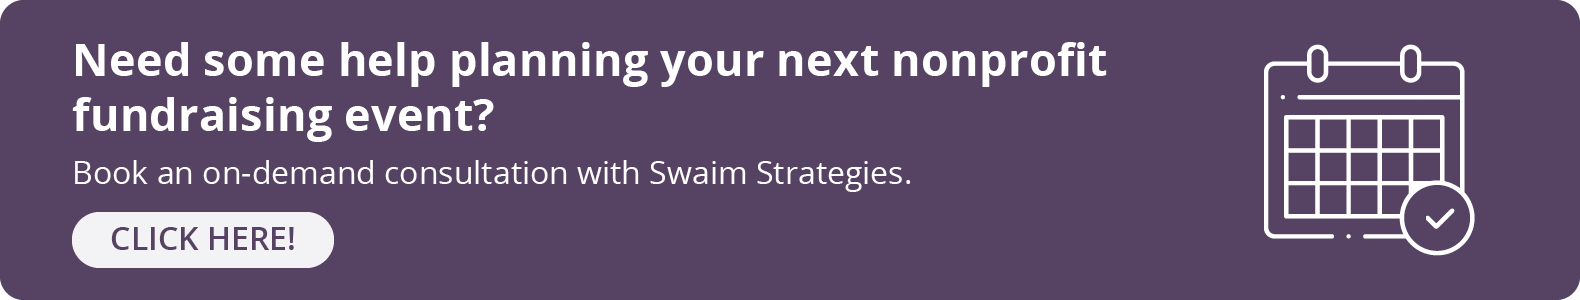 Click through to book a consultation with experts at Swaim Strategies for your next nonprofit fundraising event.